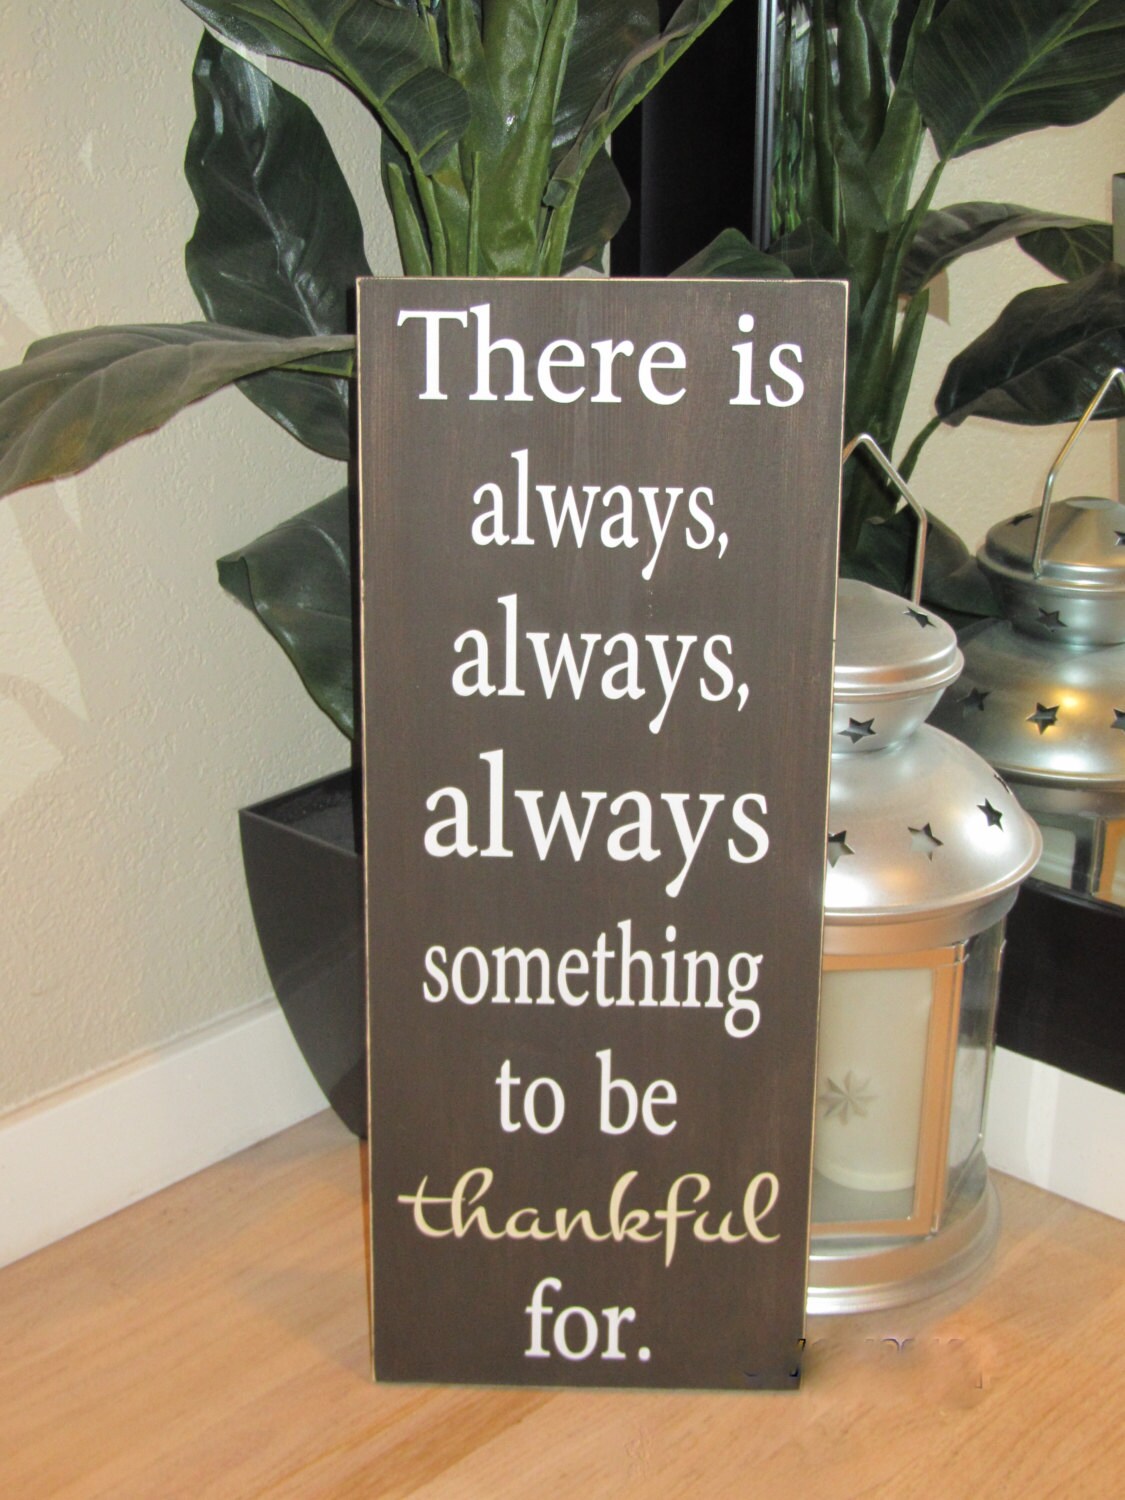 24x9 There is always always something to be thankful for | Etsy